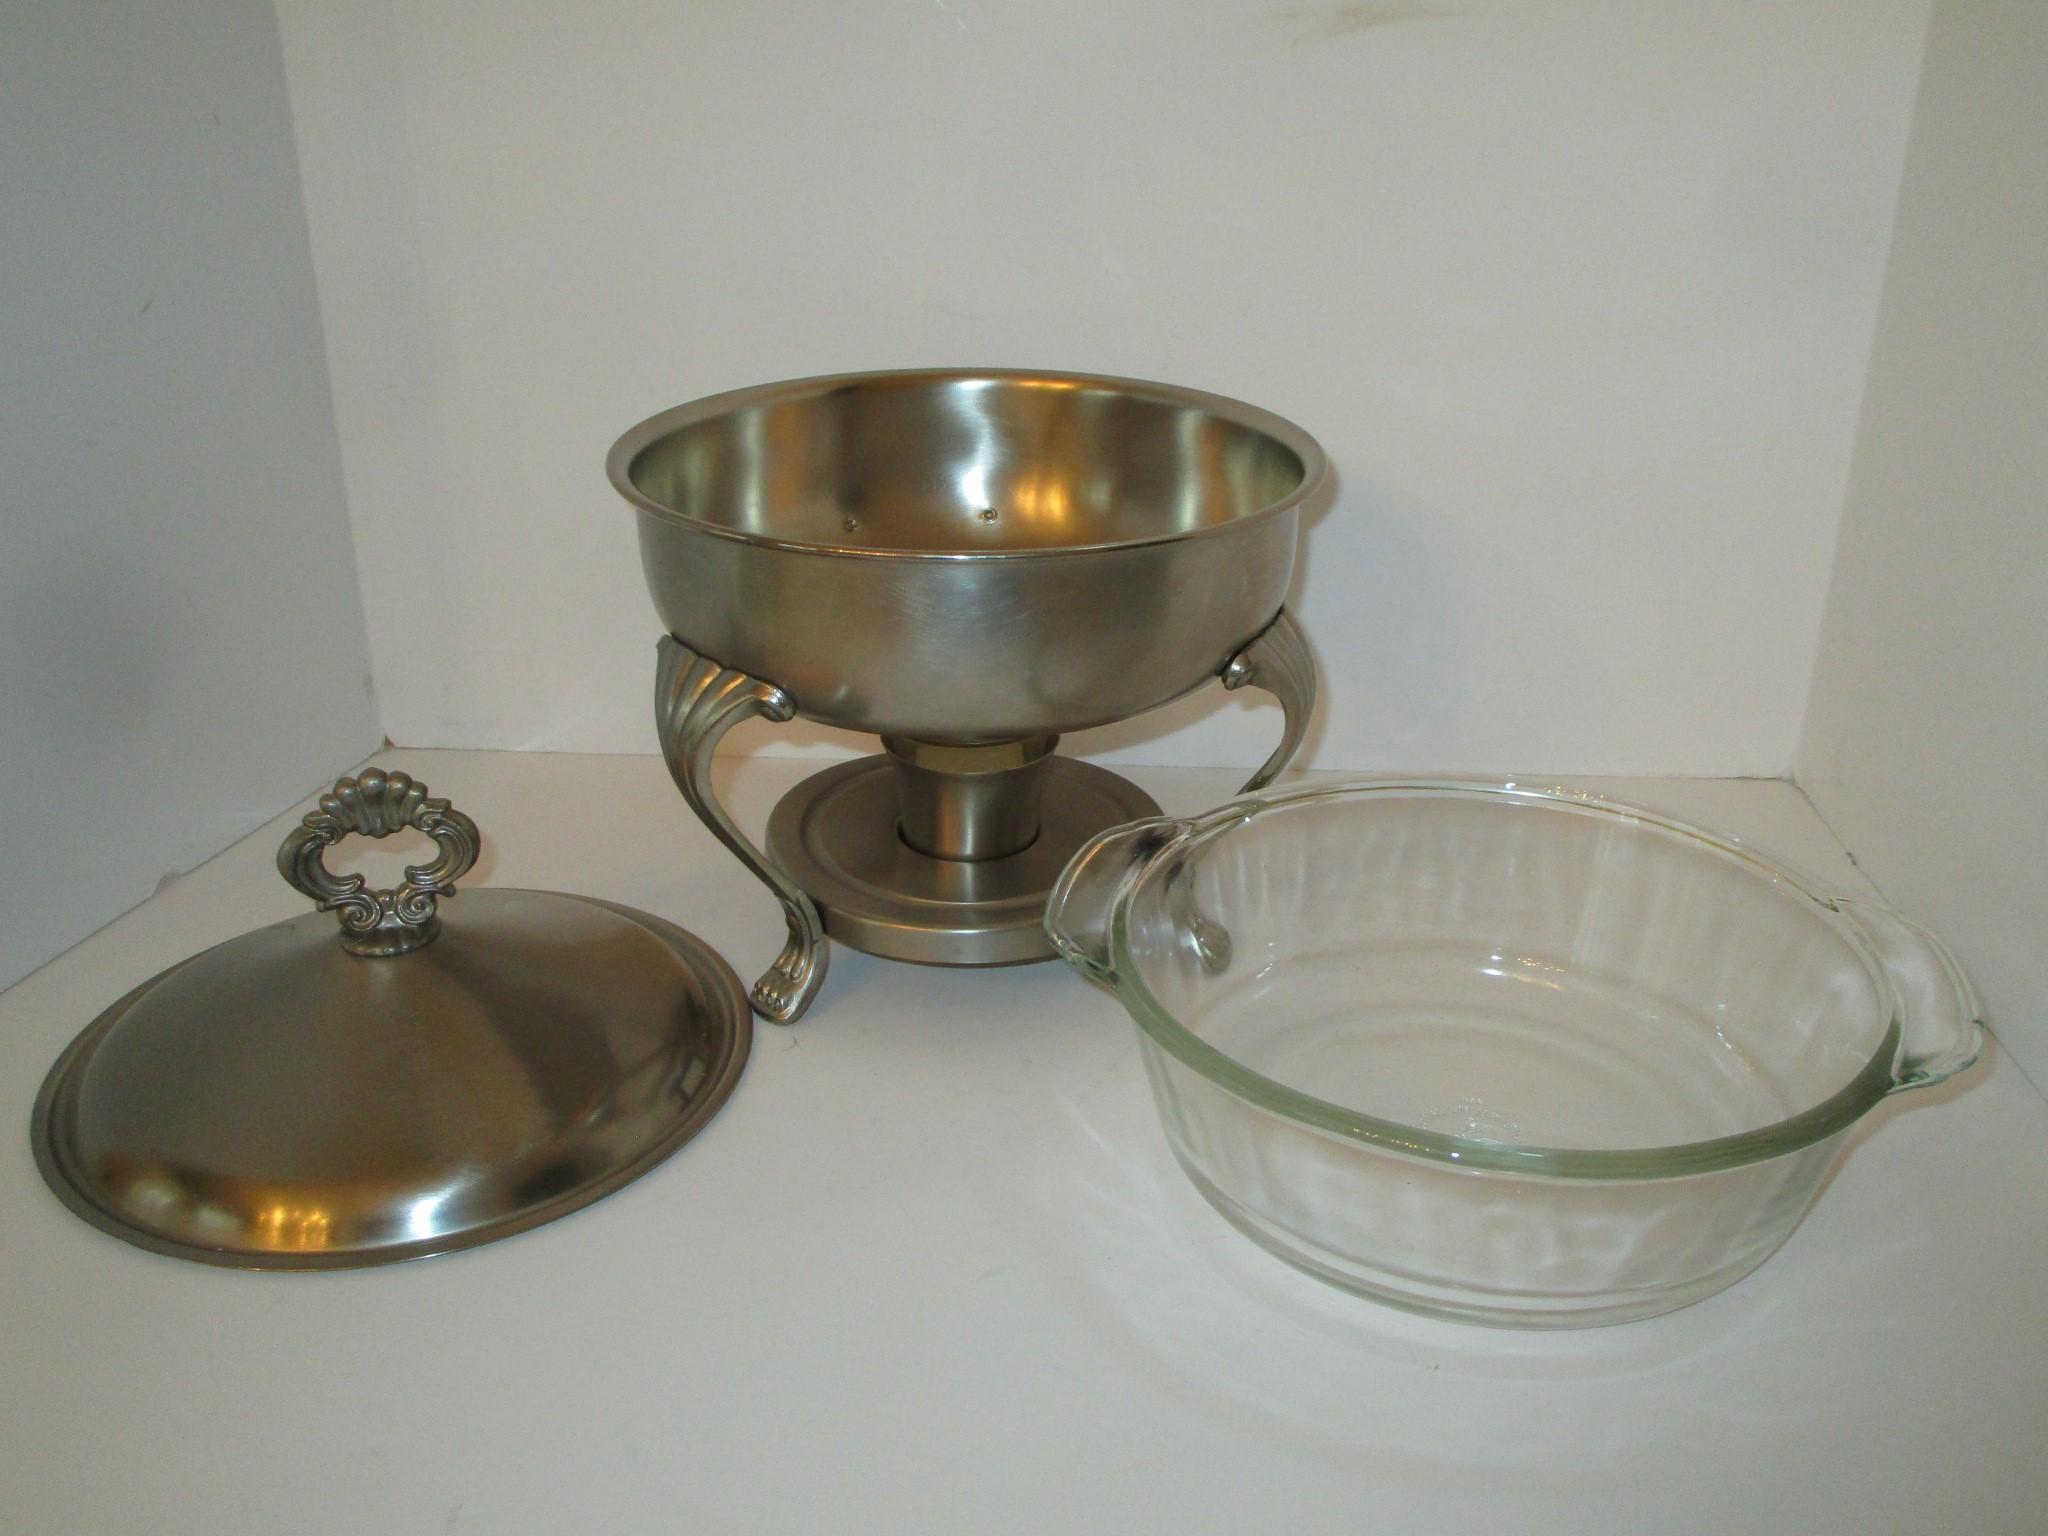 Wm Rodgers Brushed Pewter Chafing Dish w/ Lid & Warmer & Pyrex Dish Insert - 11" T X 10.5" R